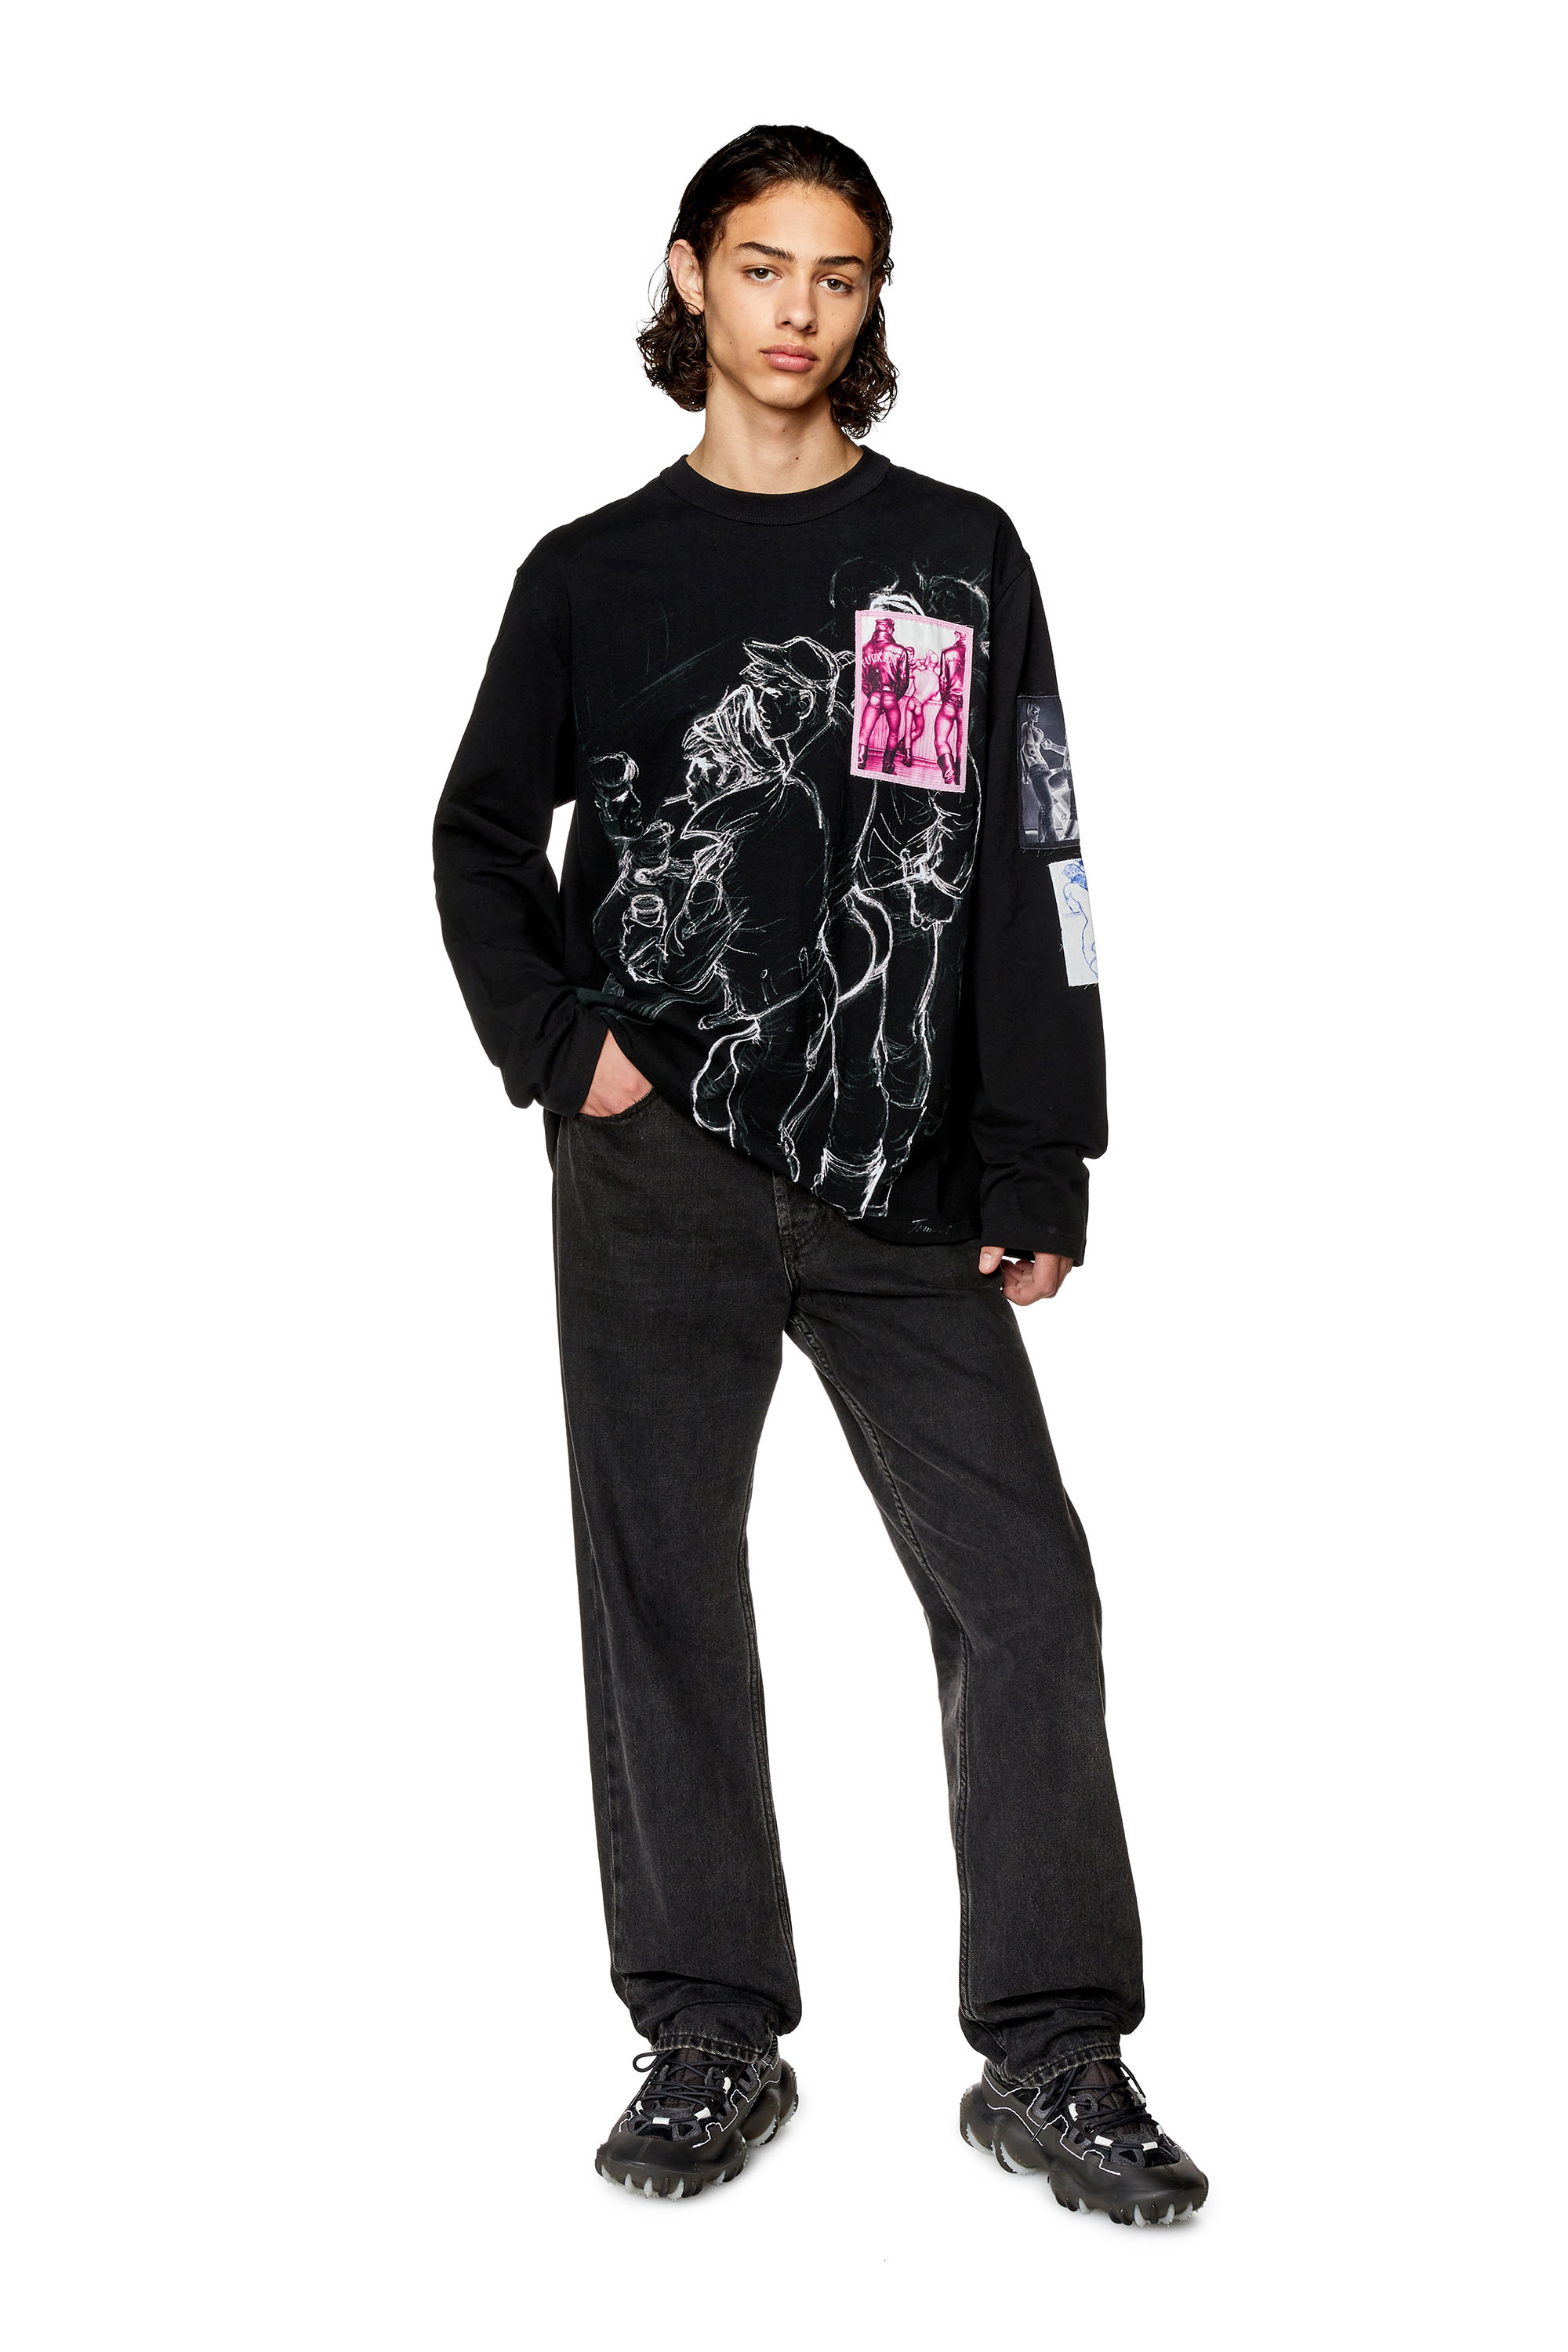 Women's Long-sleeve T-shirt with prints and patches | PR-T-CRANE-LS Diesel